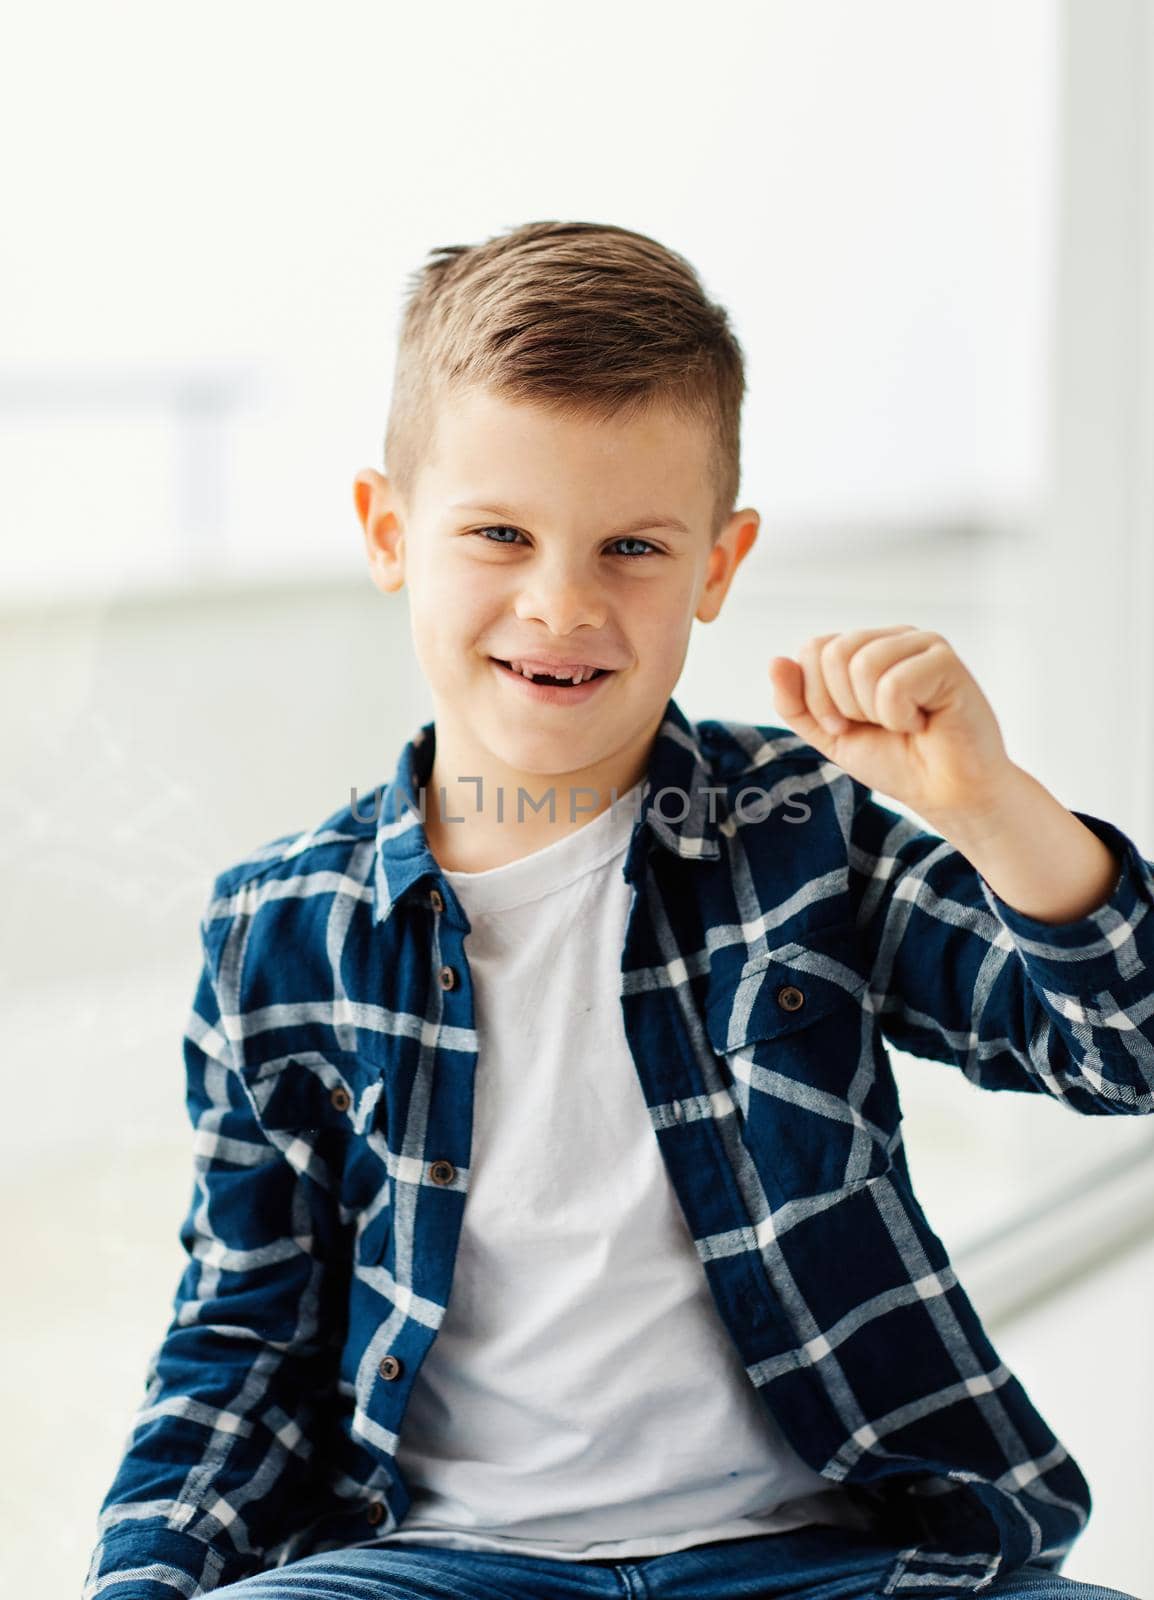 boy portrait headshot child childhood cute face male teenager teeth happy cheerful kid youth little by Picsfive